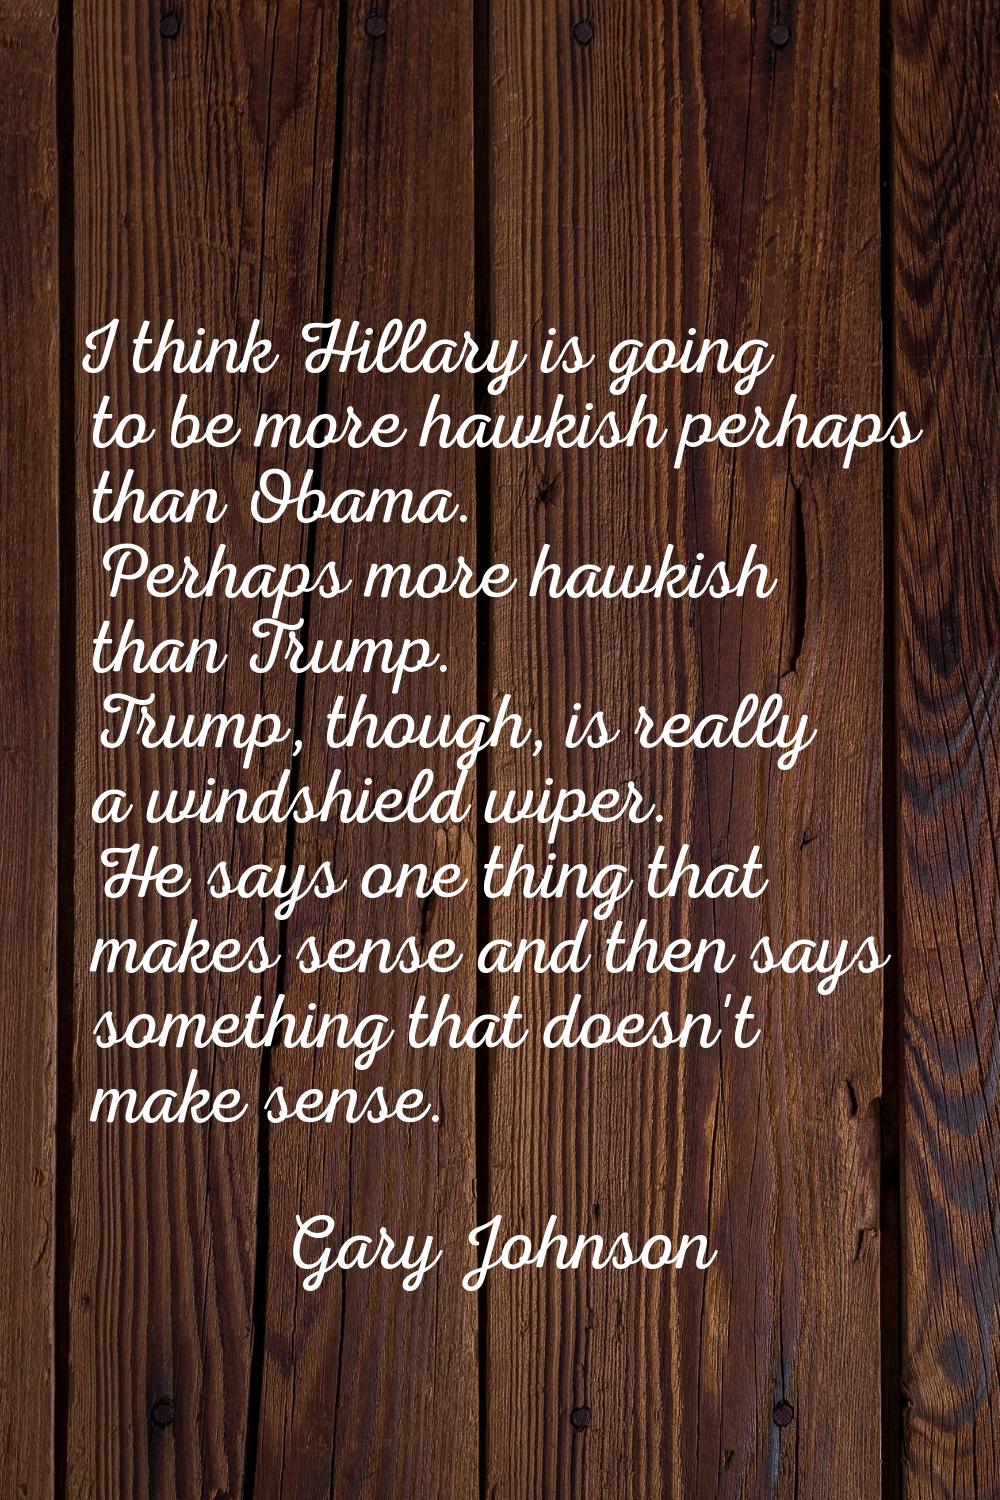 I think Hillary is going to be more hawkish perhaps than Obama. Perhaps more hawkish than Trump. Tr